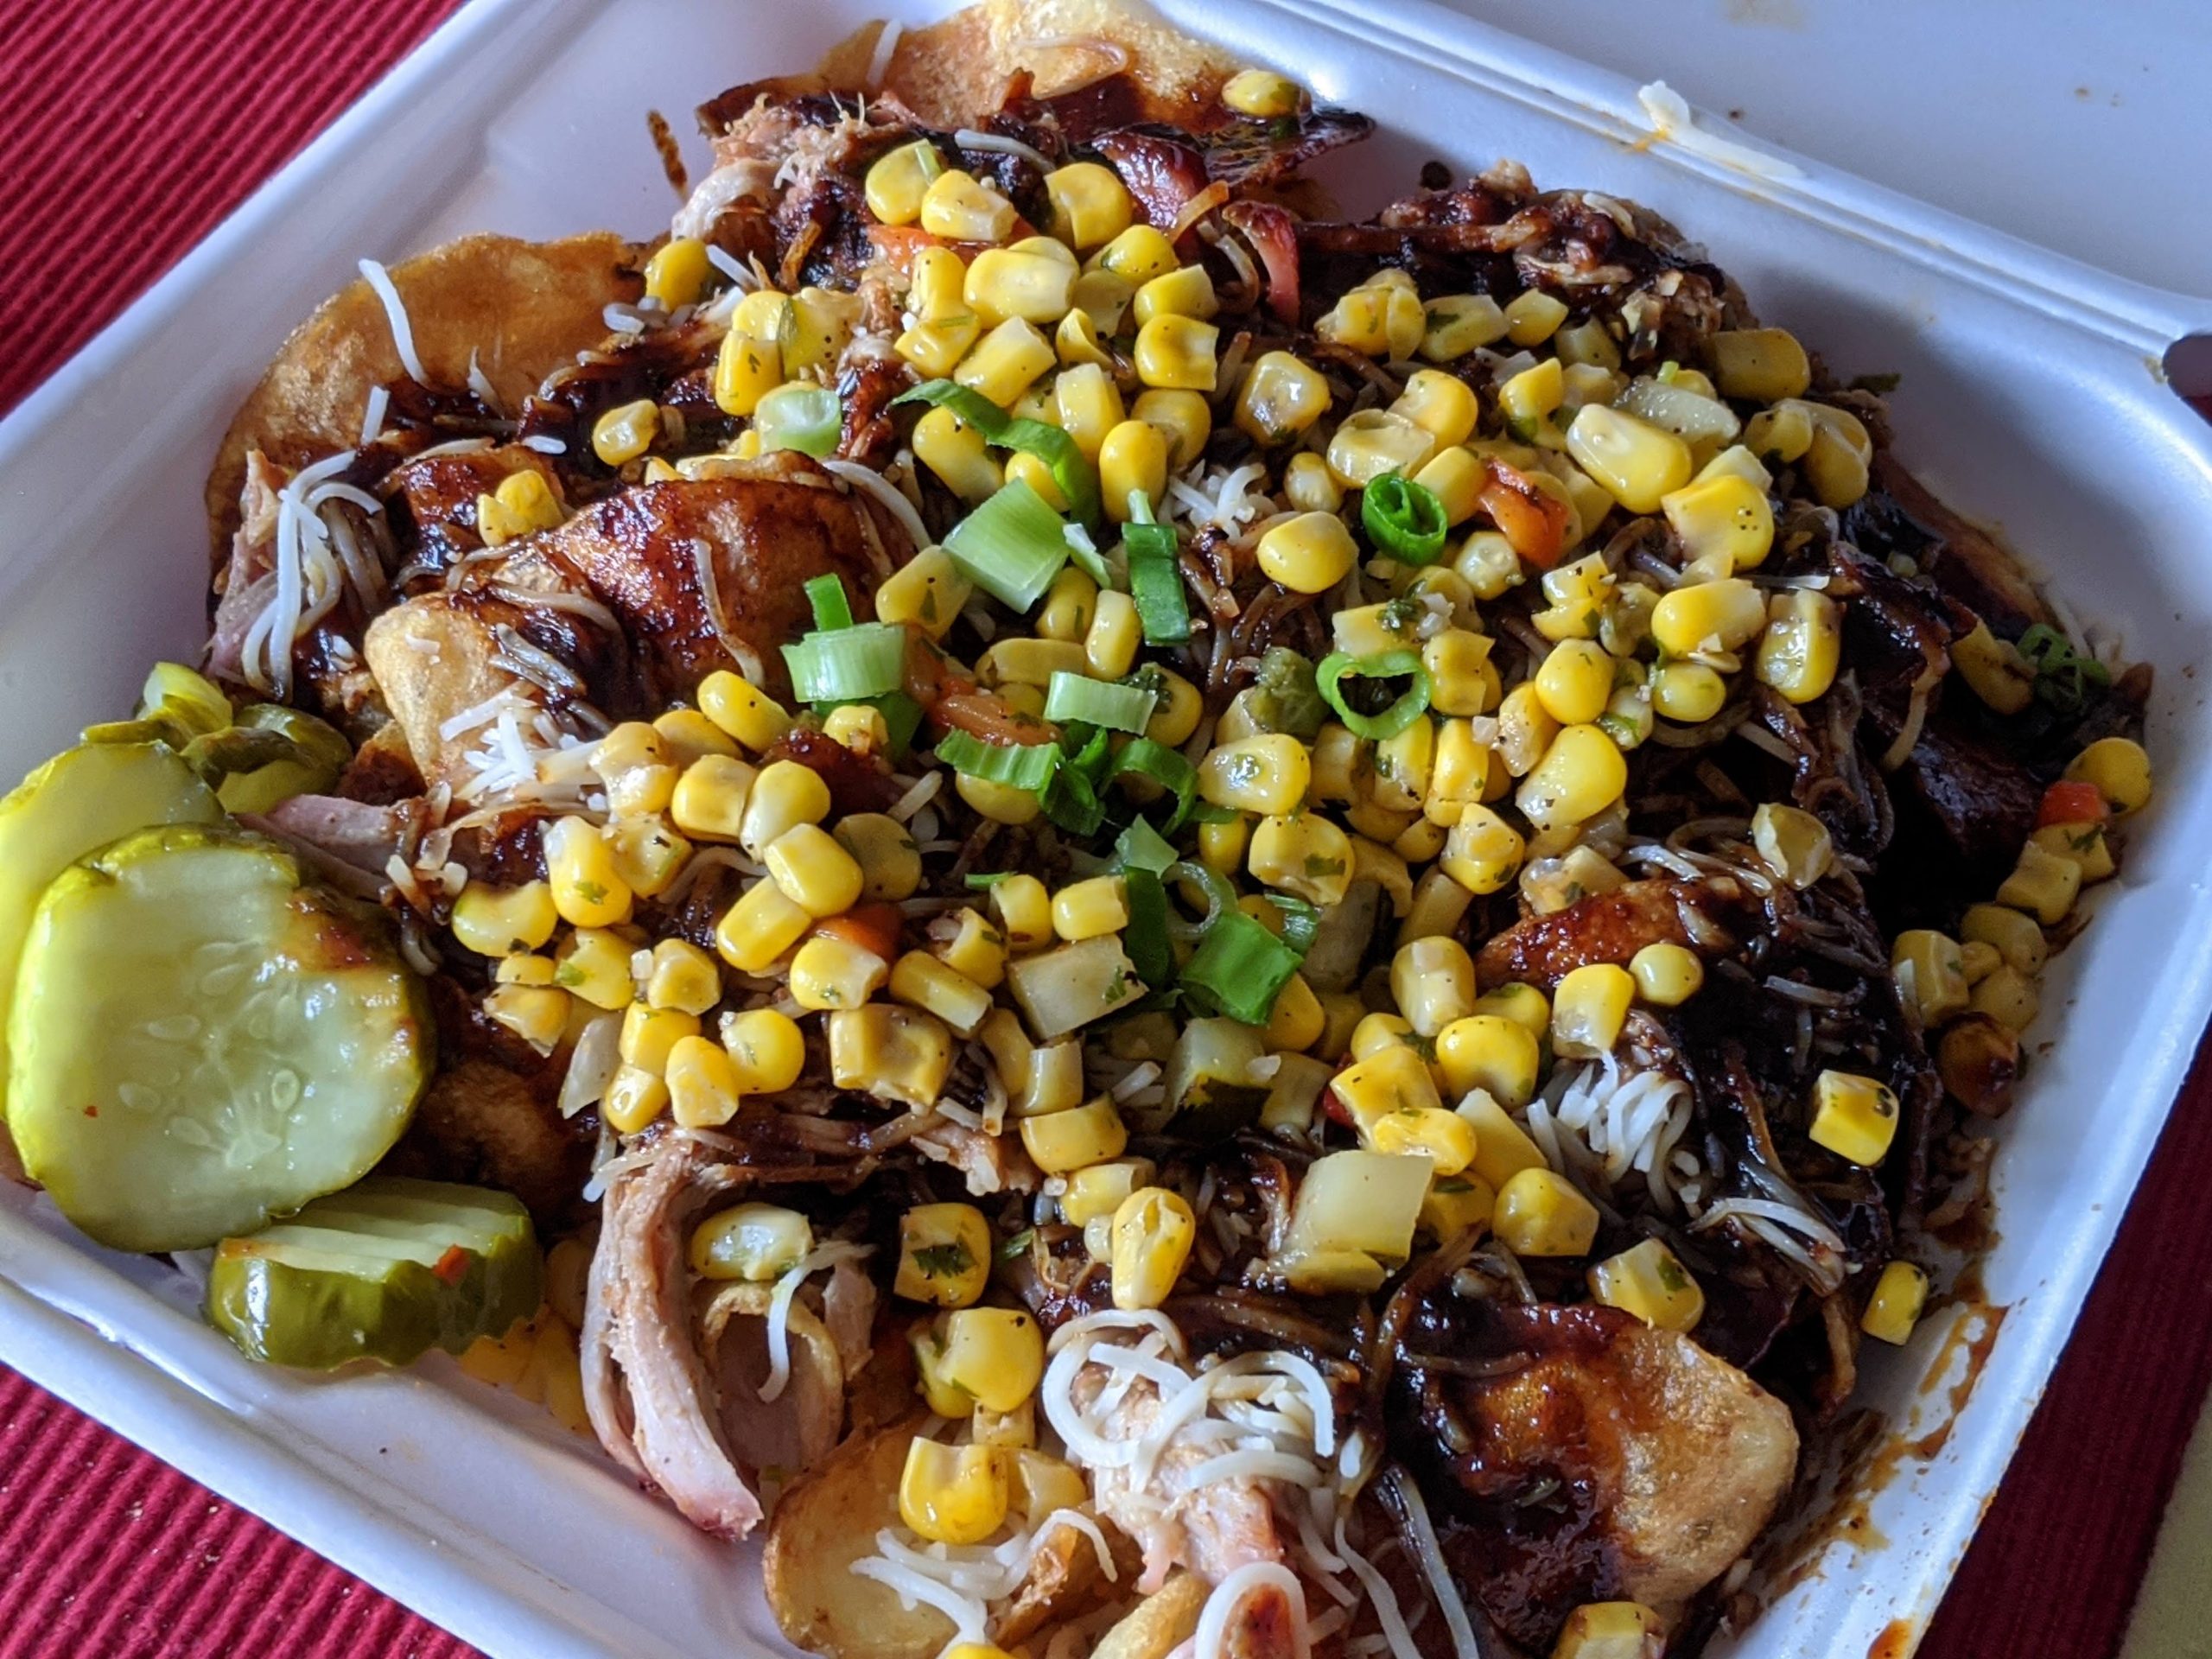 Redneck nachos at Kue'd Smokehouse in a Des Moines suburb